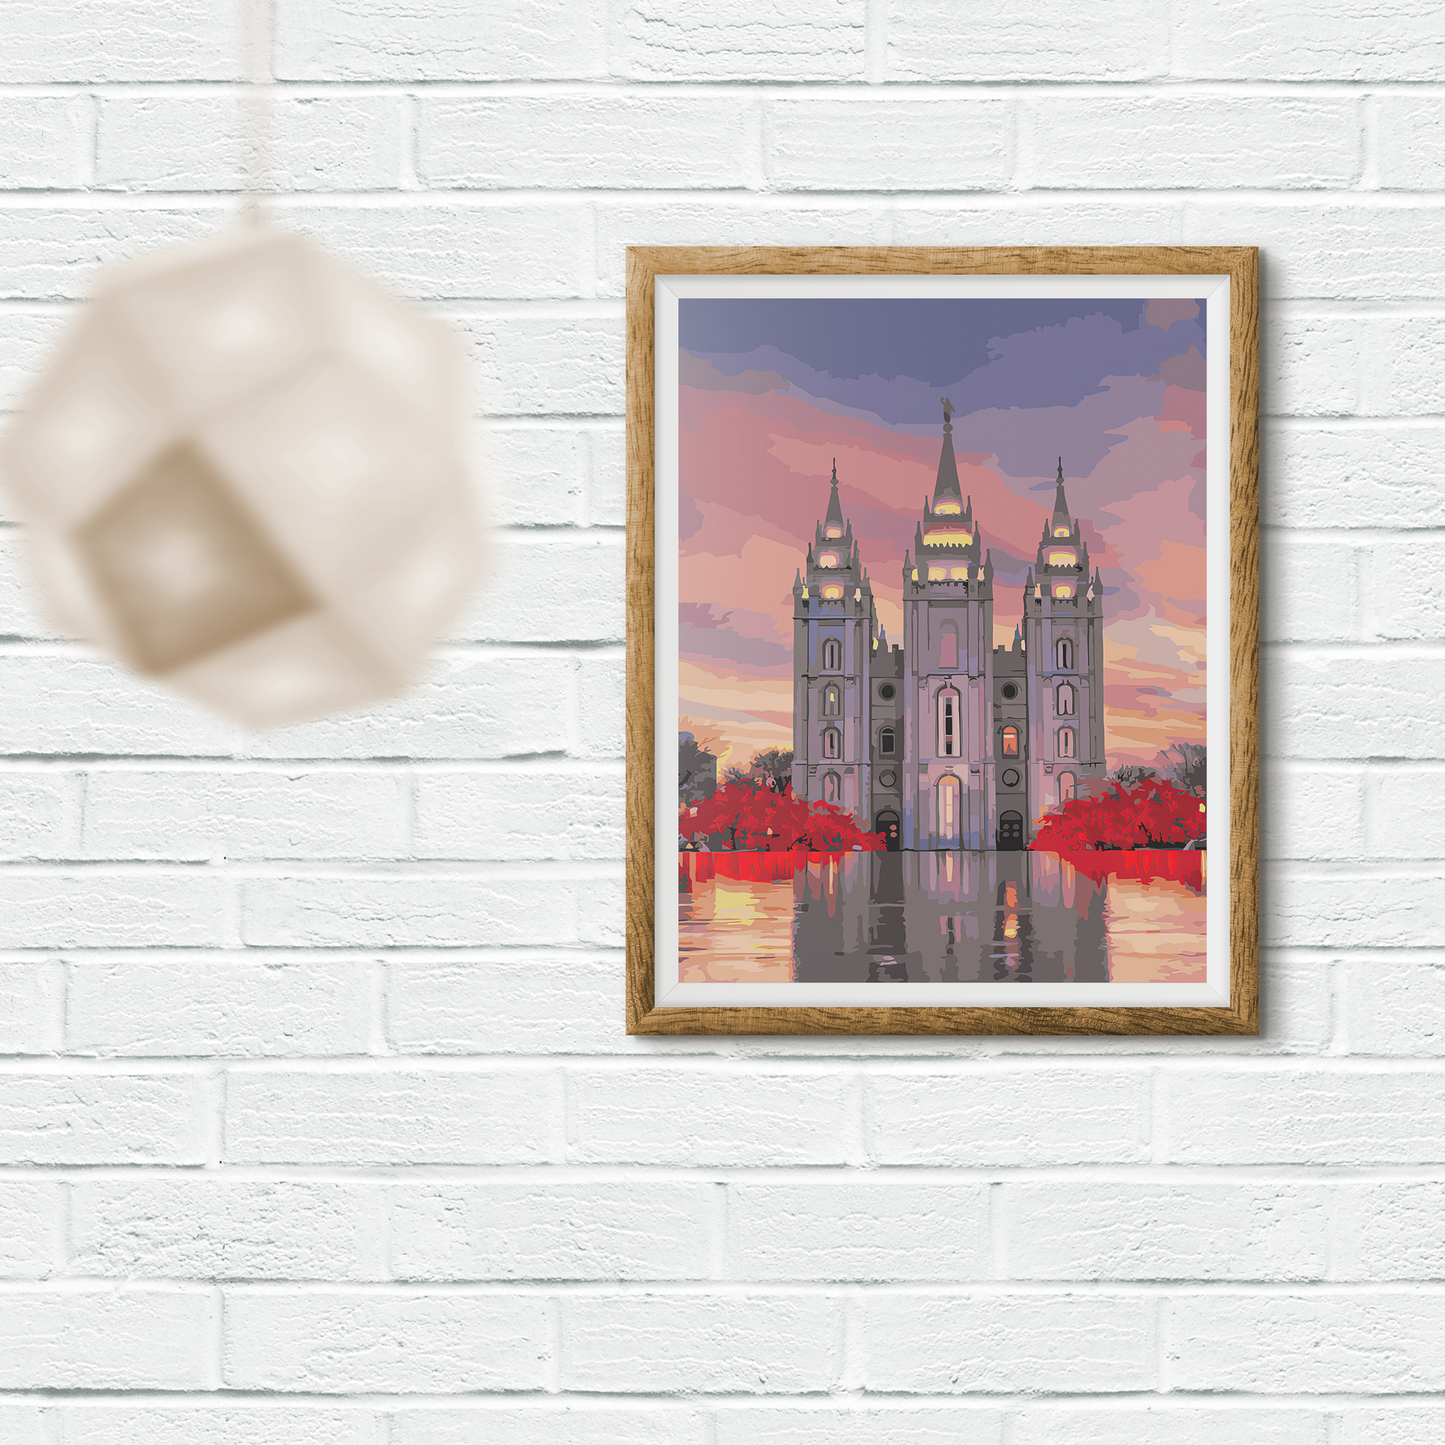 Salt Lake City Sunset LDS Temple Paint by Numbers Kits